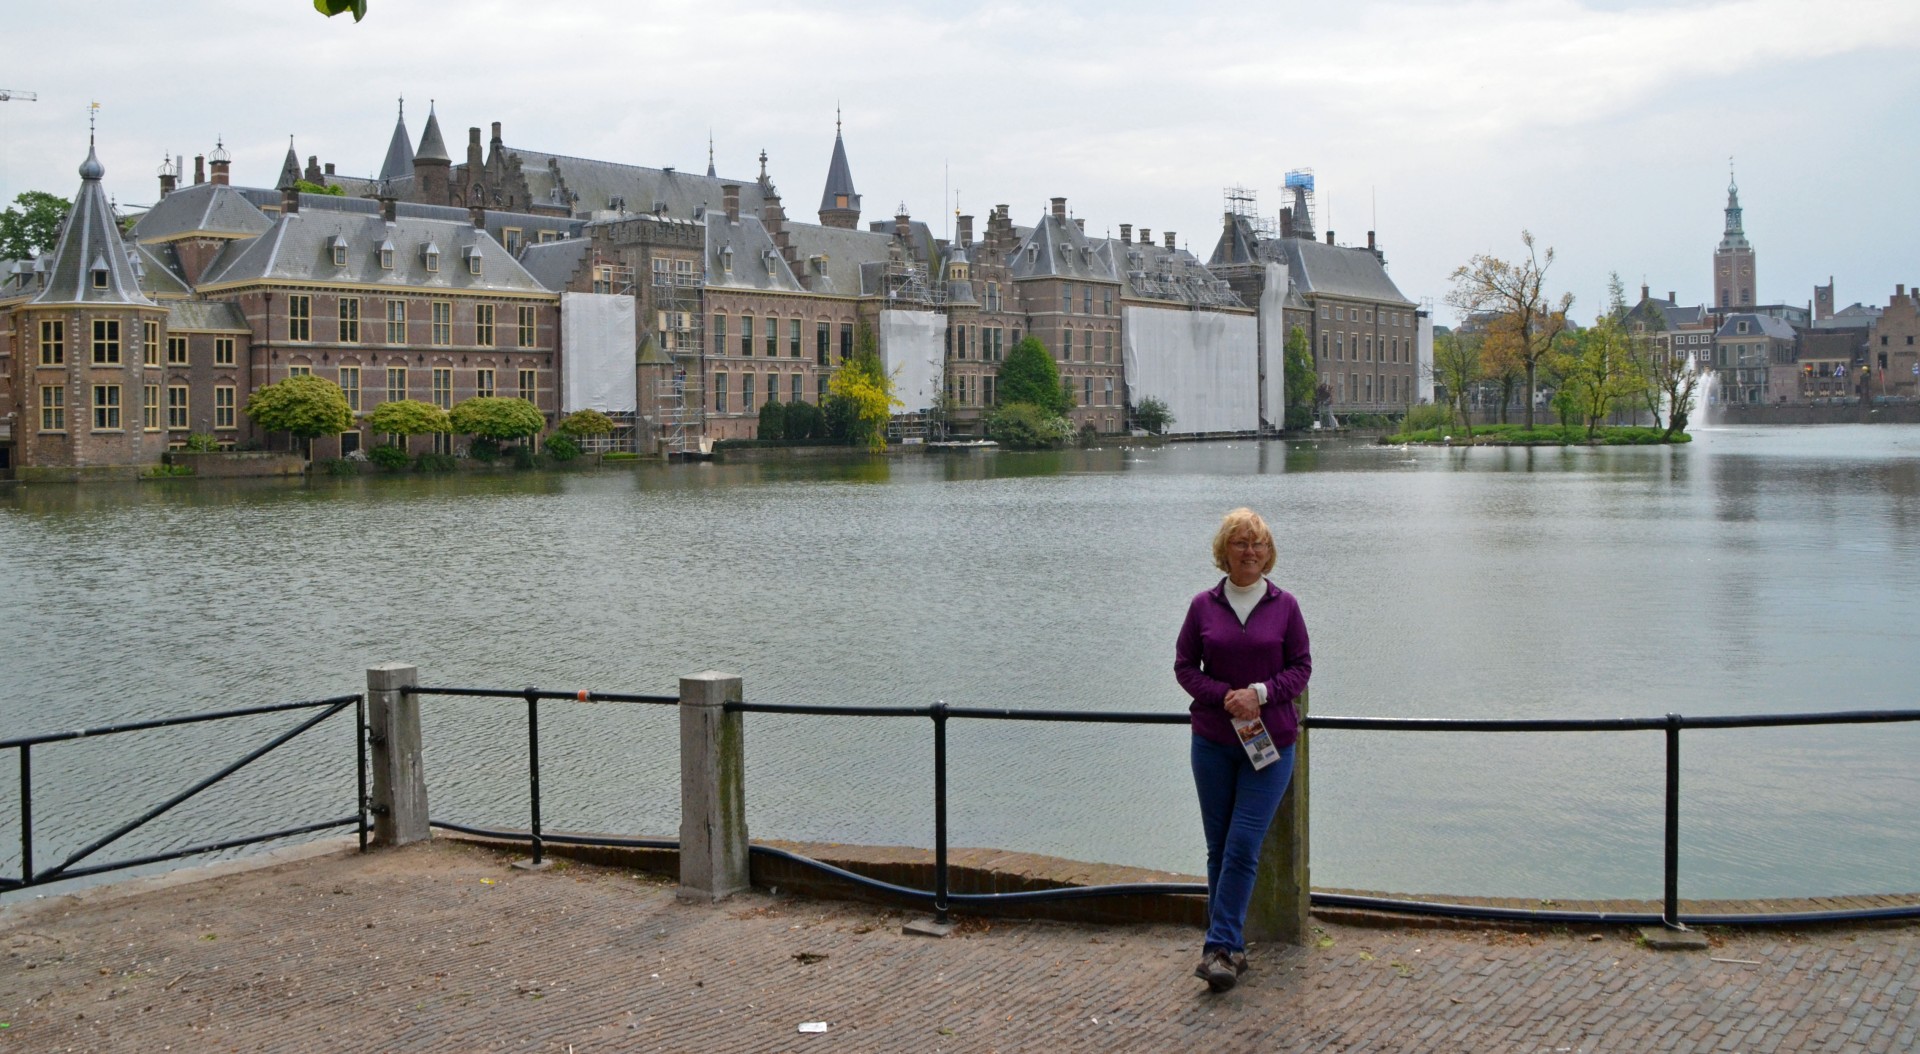 Alison and the Dutch Houses of Parliament, The Hague